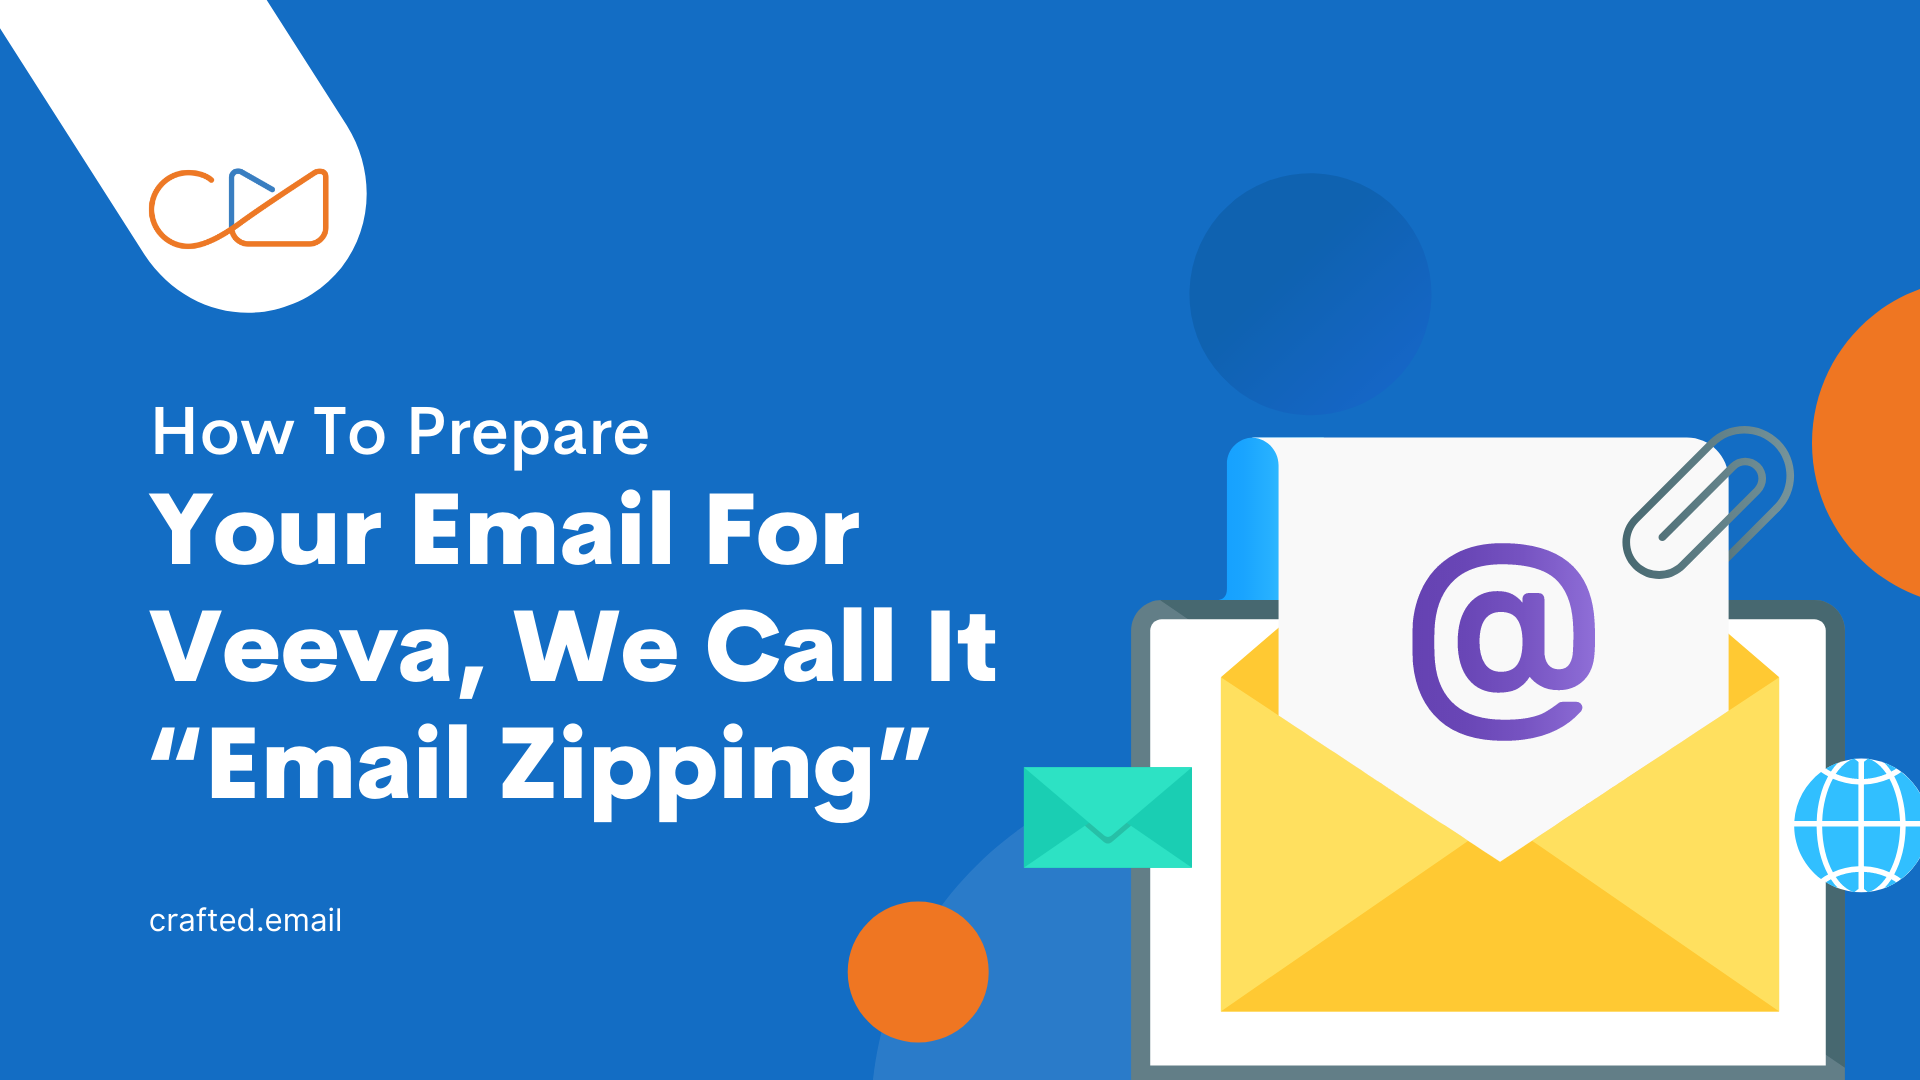 How To Prepare Your Email For Veeva, We Call It “Email Zipping”